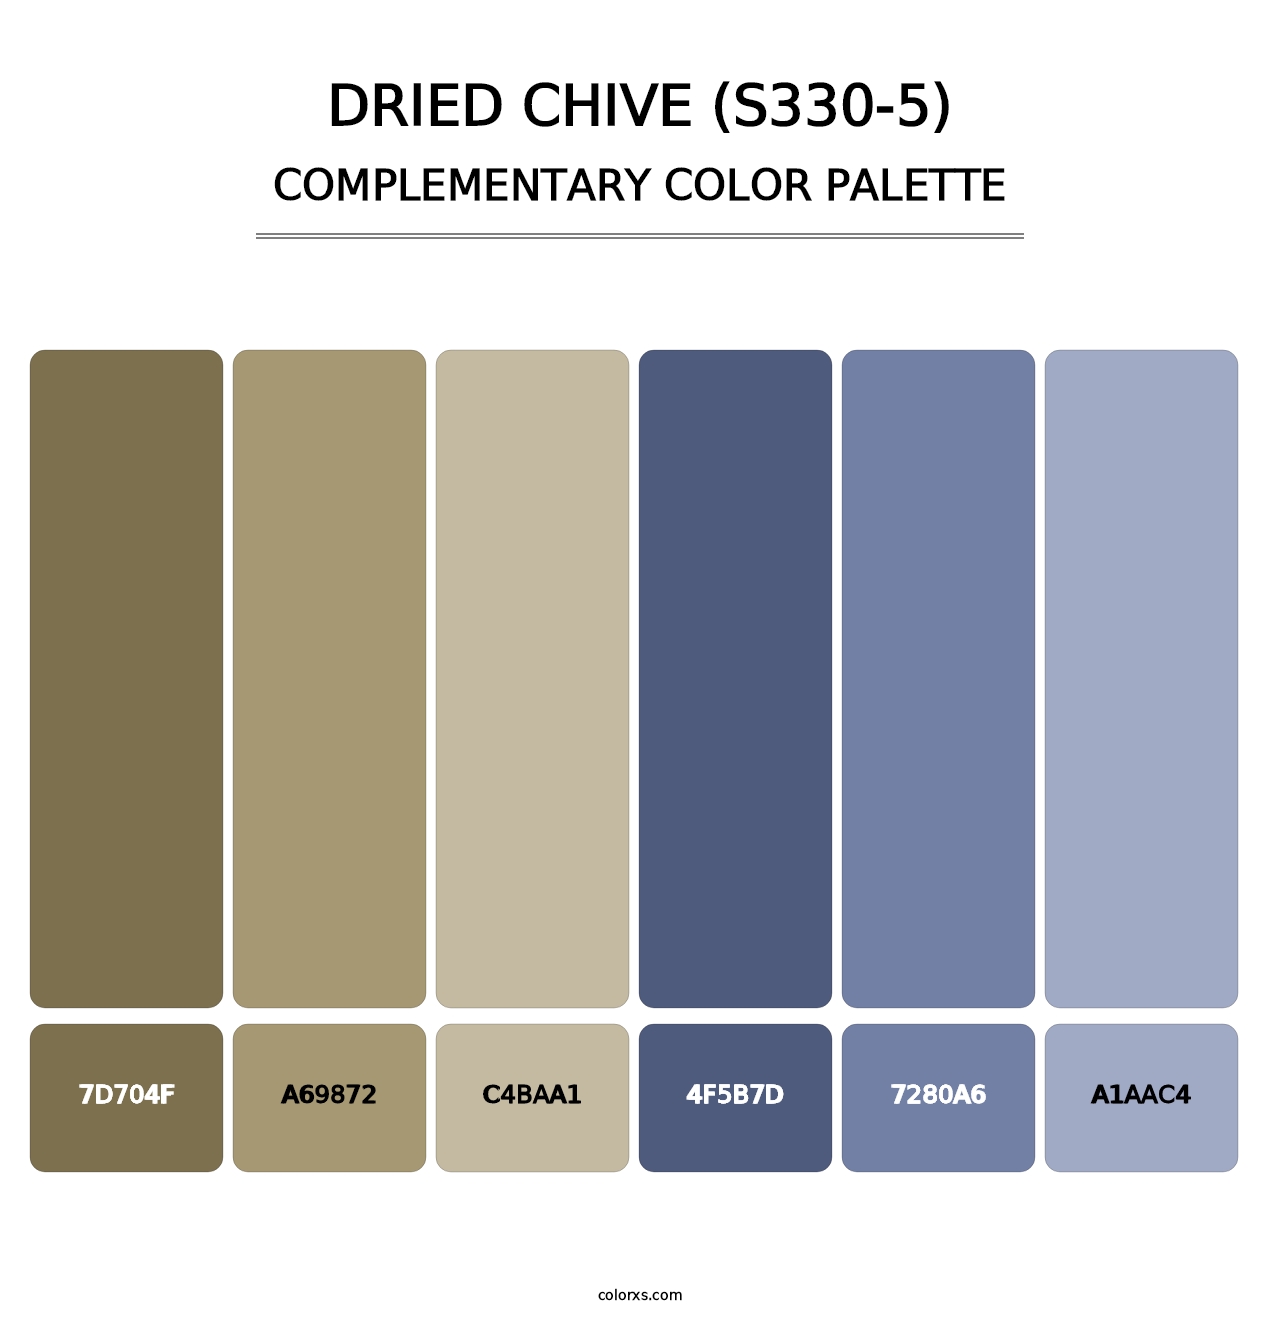 Dried Chive (S330-5) - Complementary Color Palette